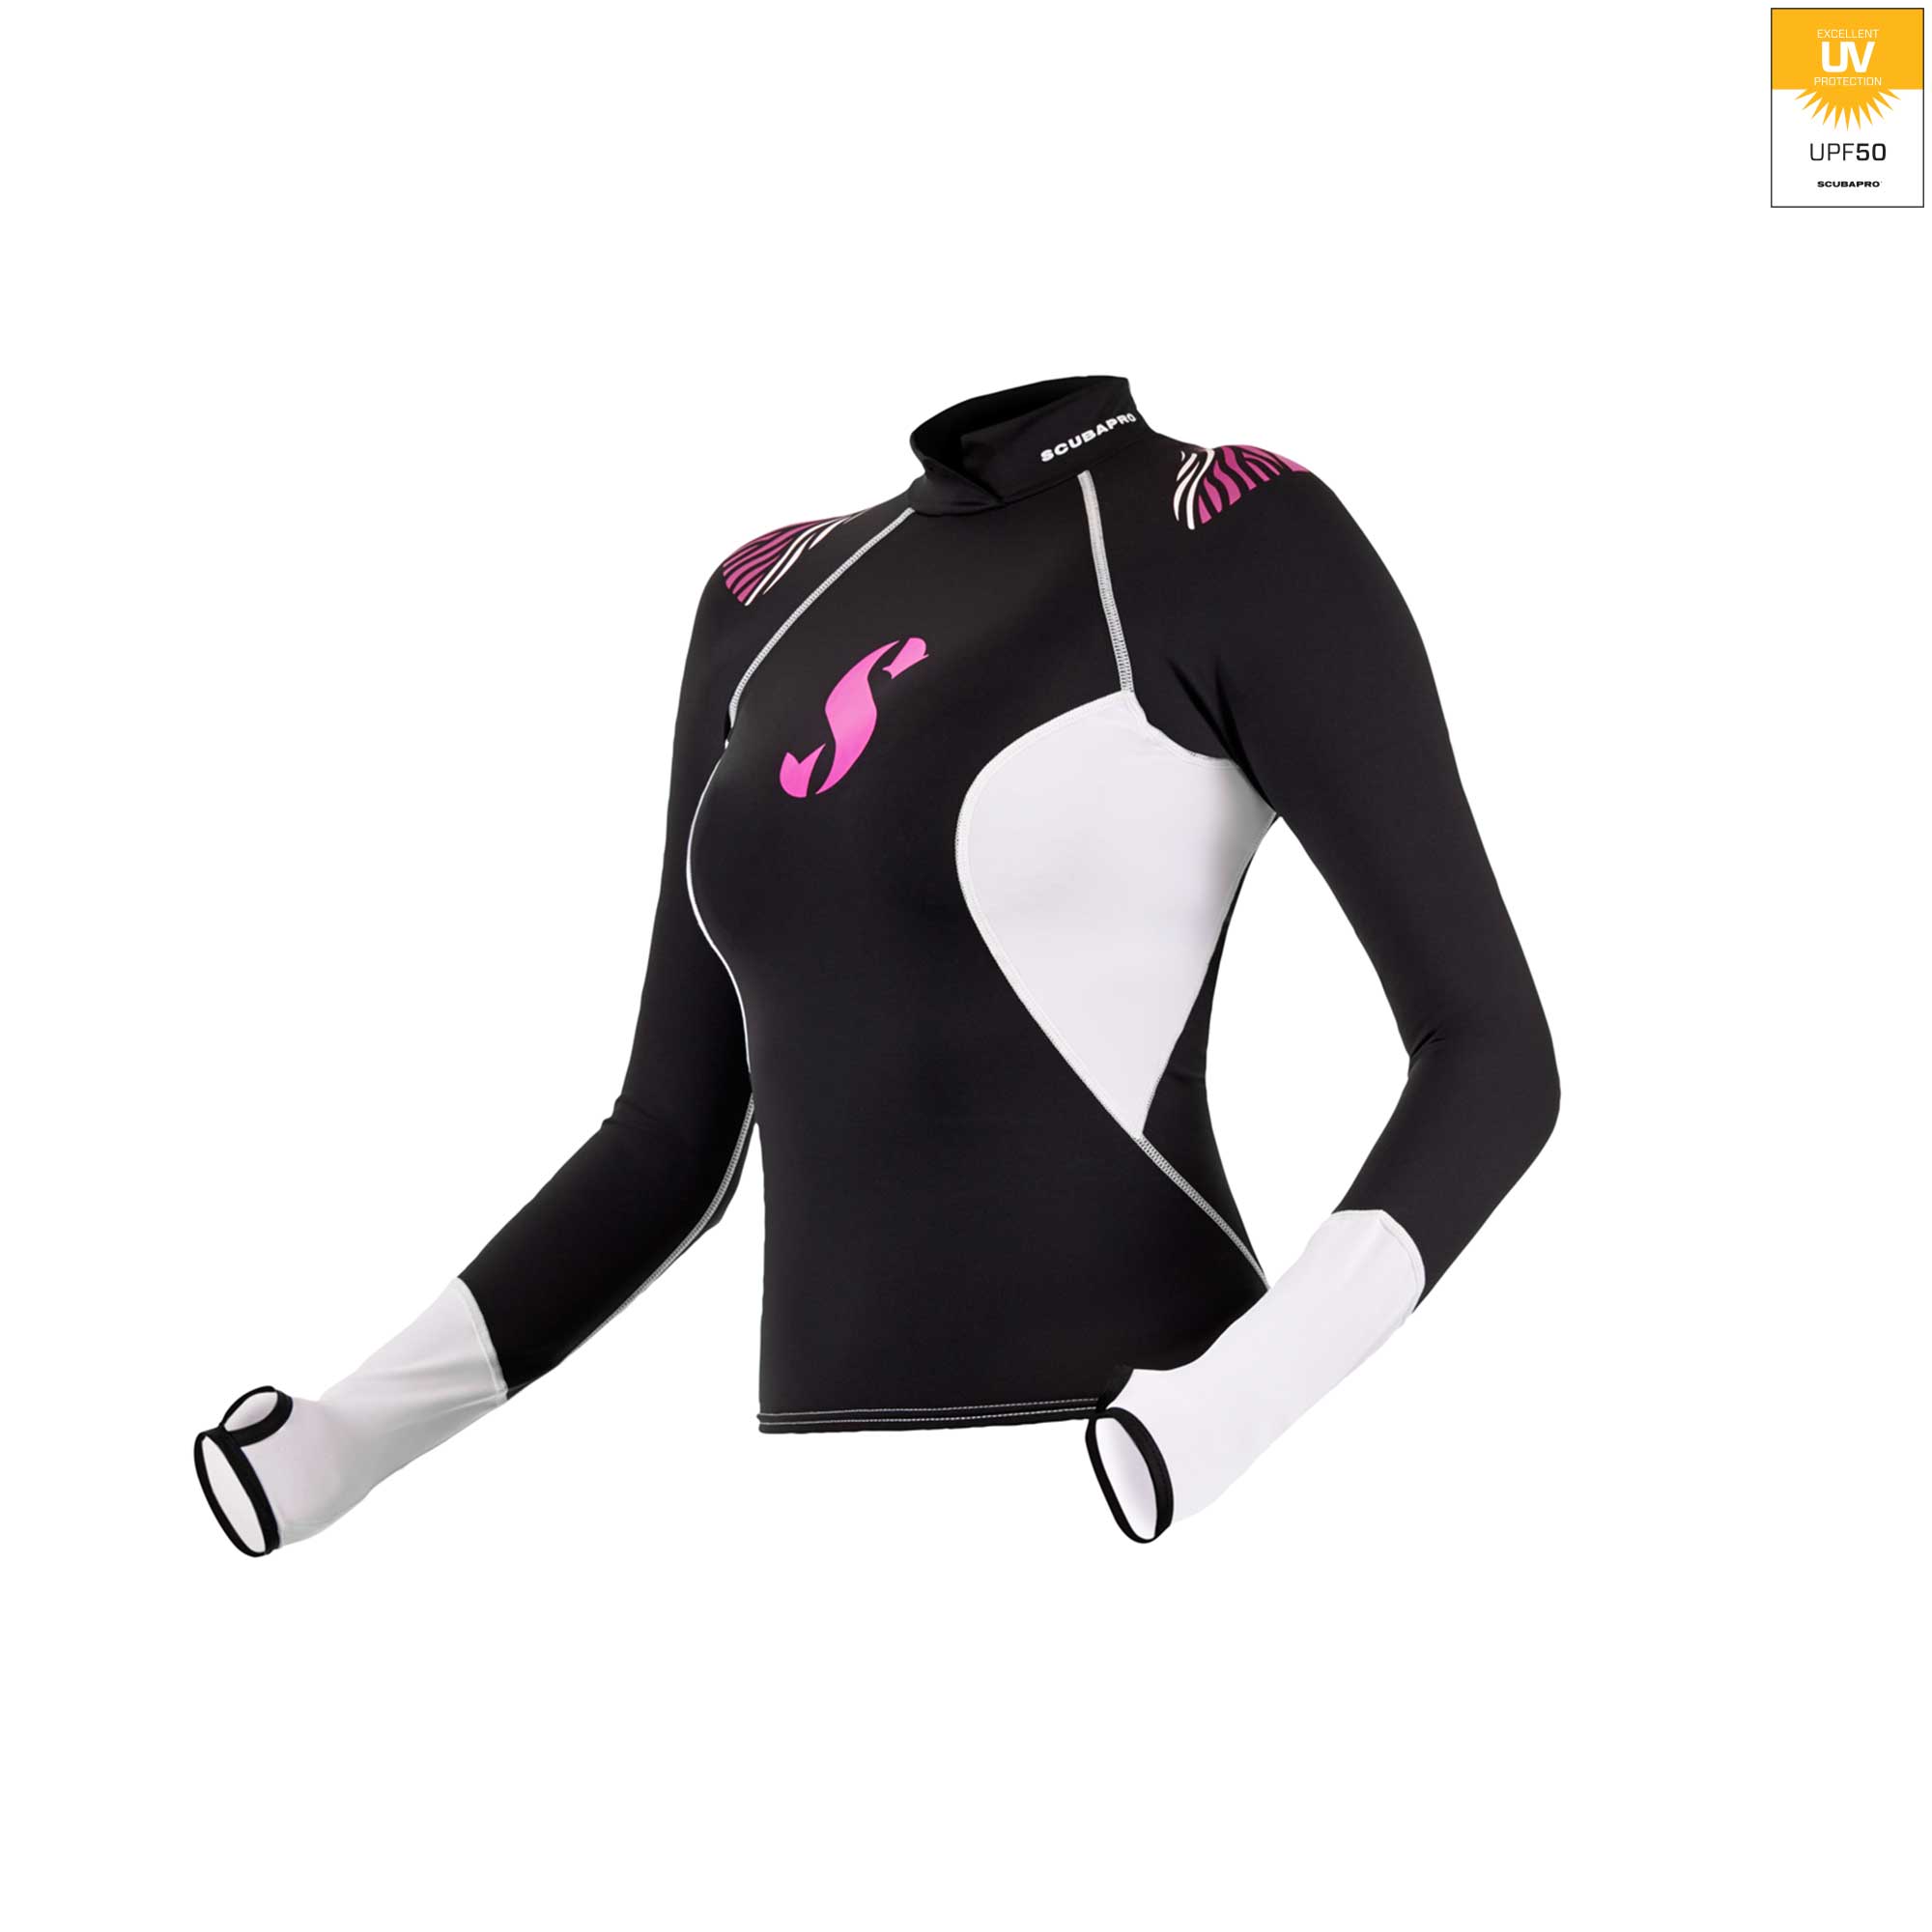 Details about   RASH GUARD PARAISO From Subgear 